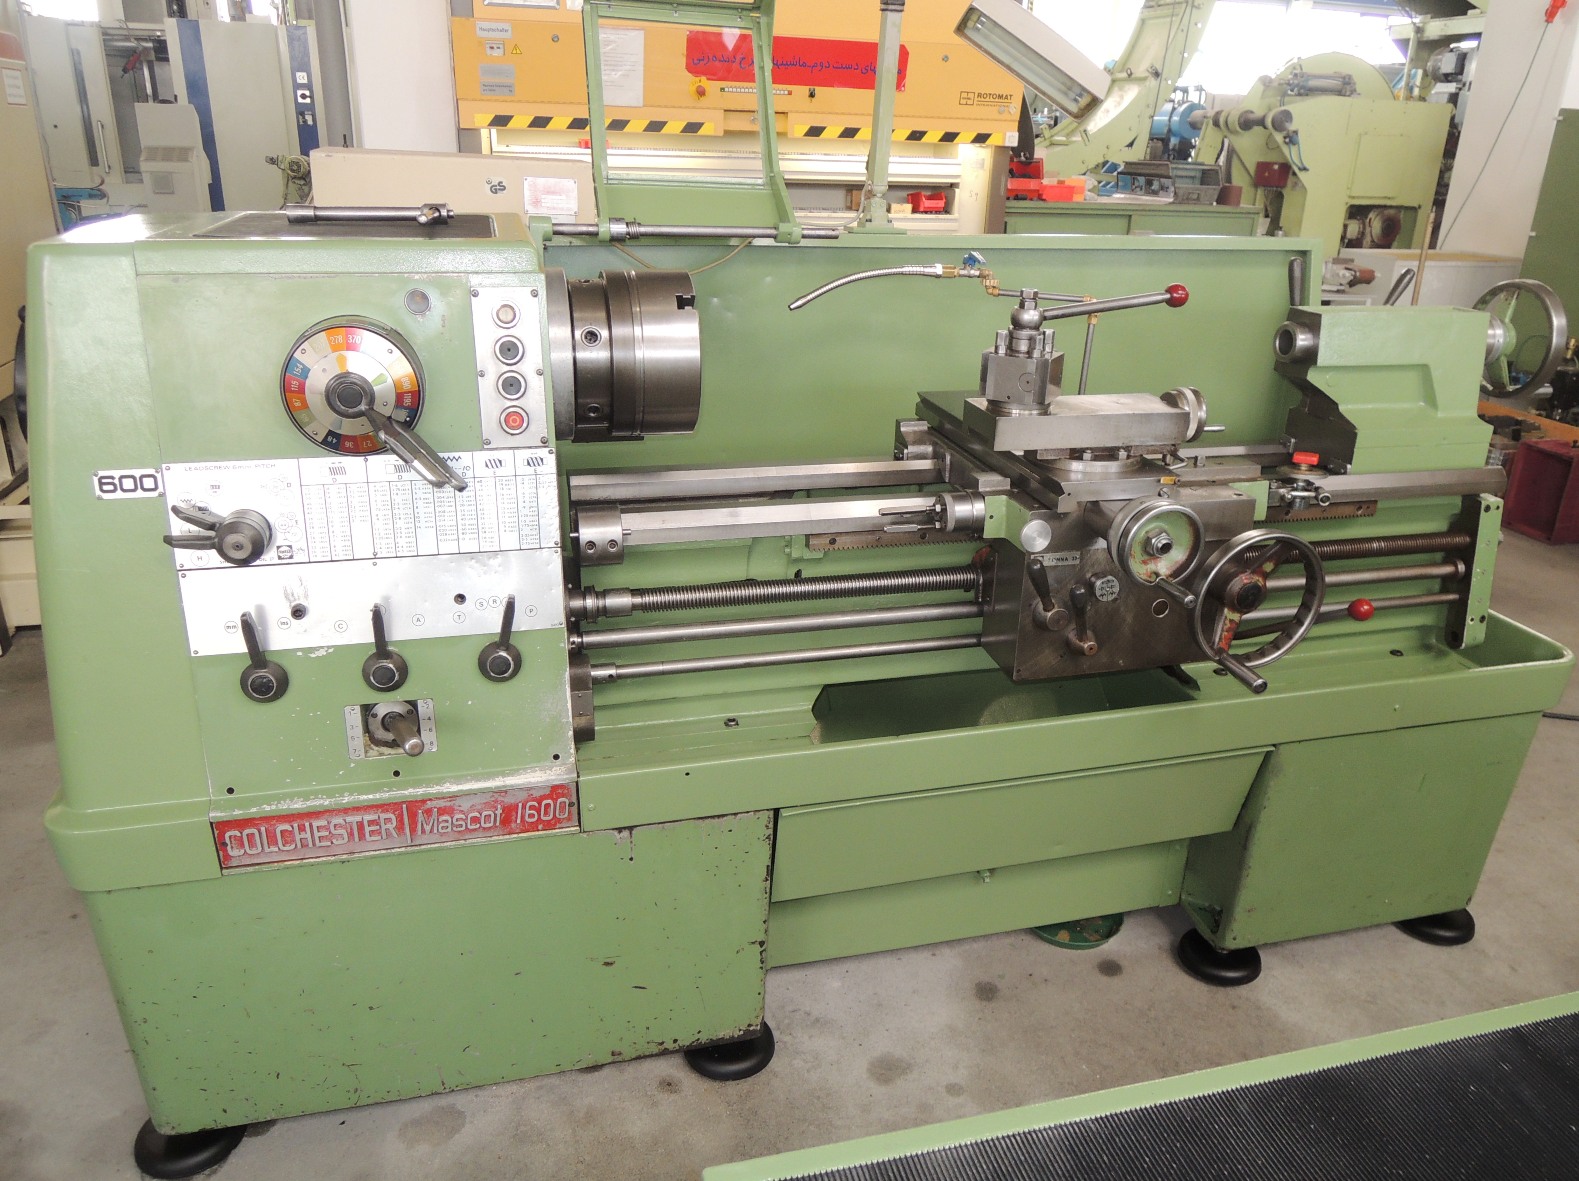 Lathes (CNC and Manual)/COLCHESTER(GB) MASCOT 1600